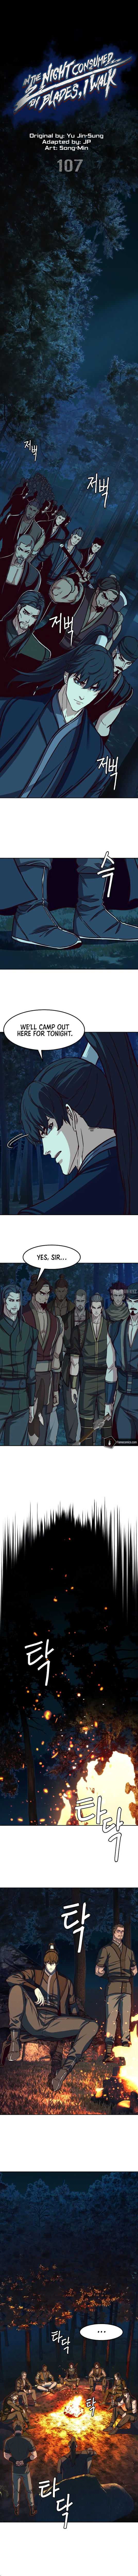 Sword Fanatic Wanders Through The Night - Chapter 107 Page 2